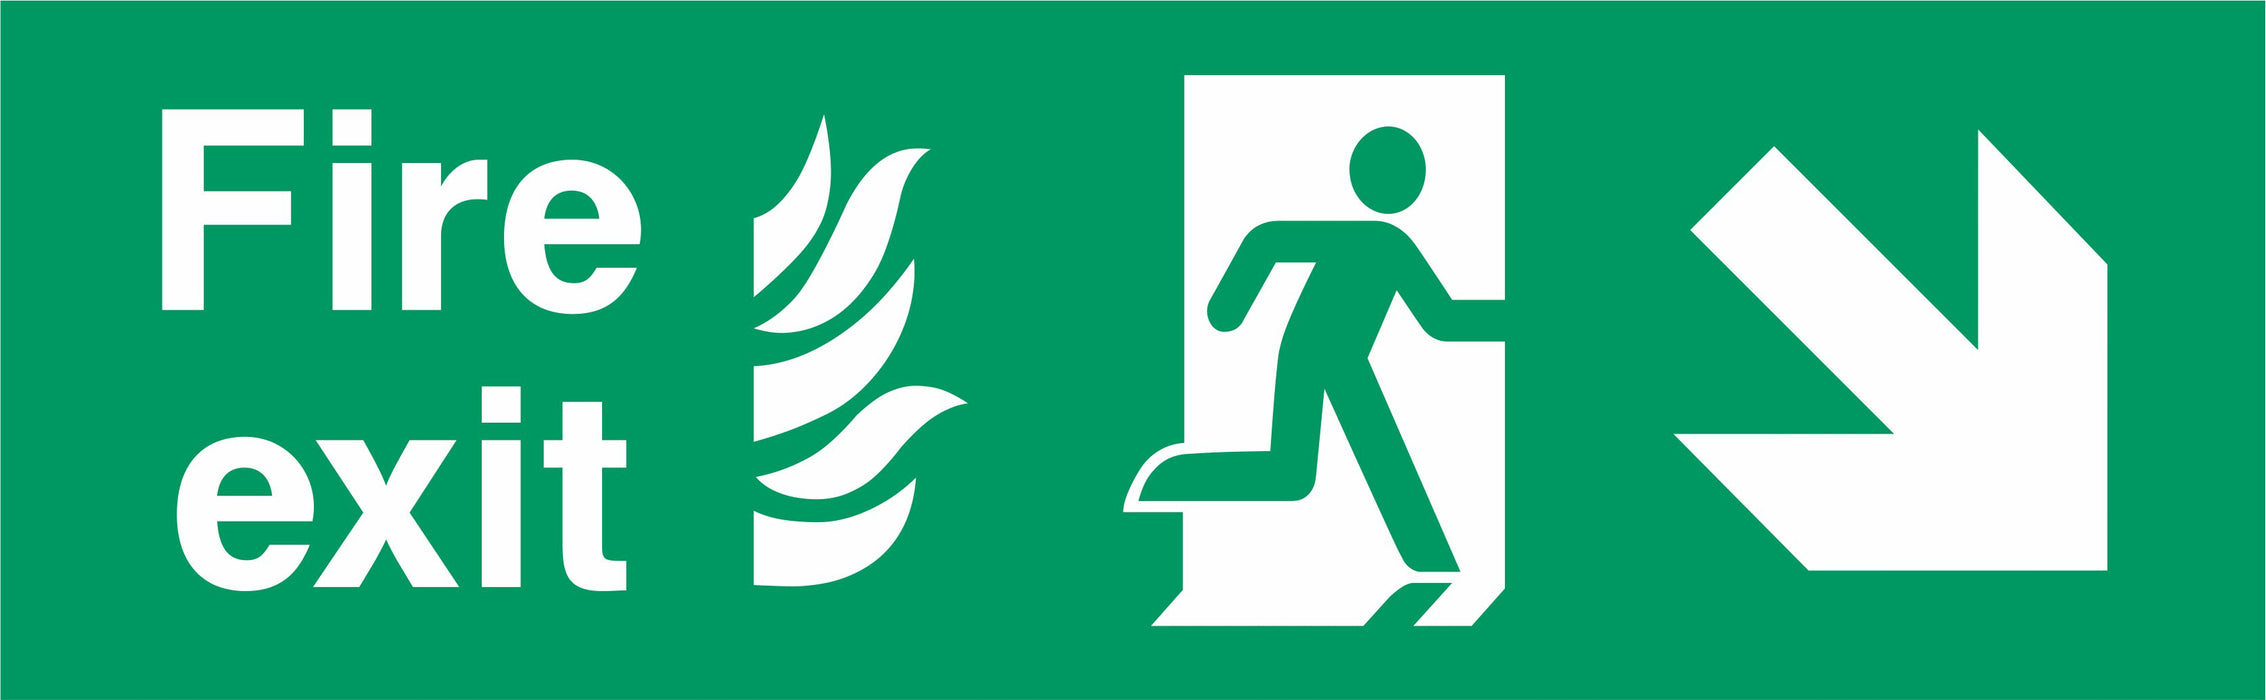 Fire Exit - Running Man Right - Right Down Arrow - NHS COMPLIANT